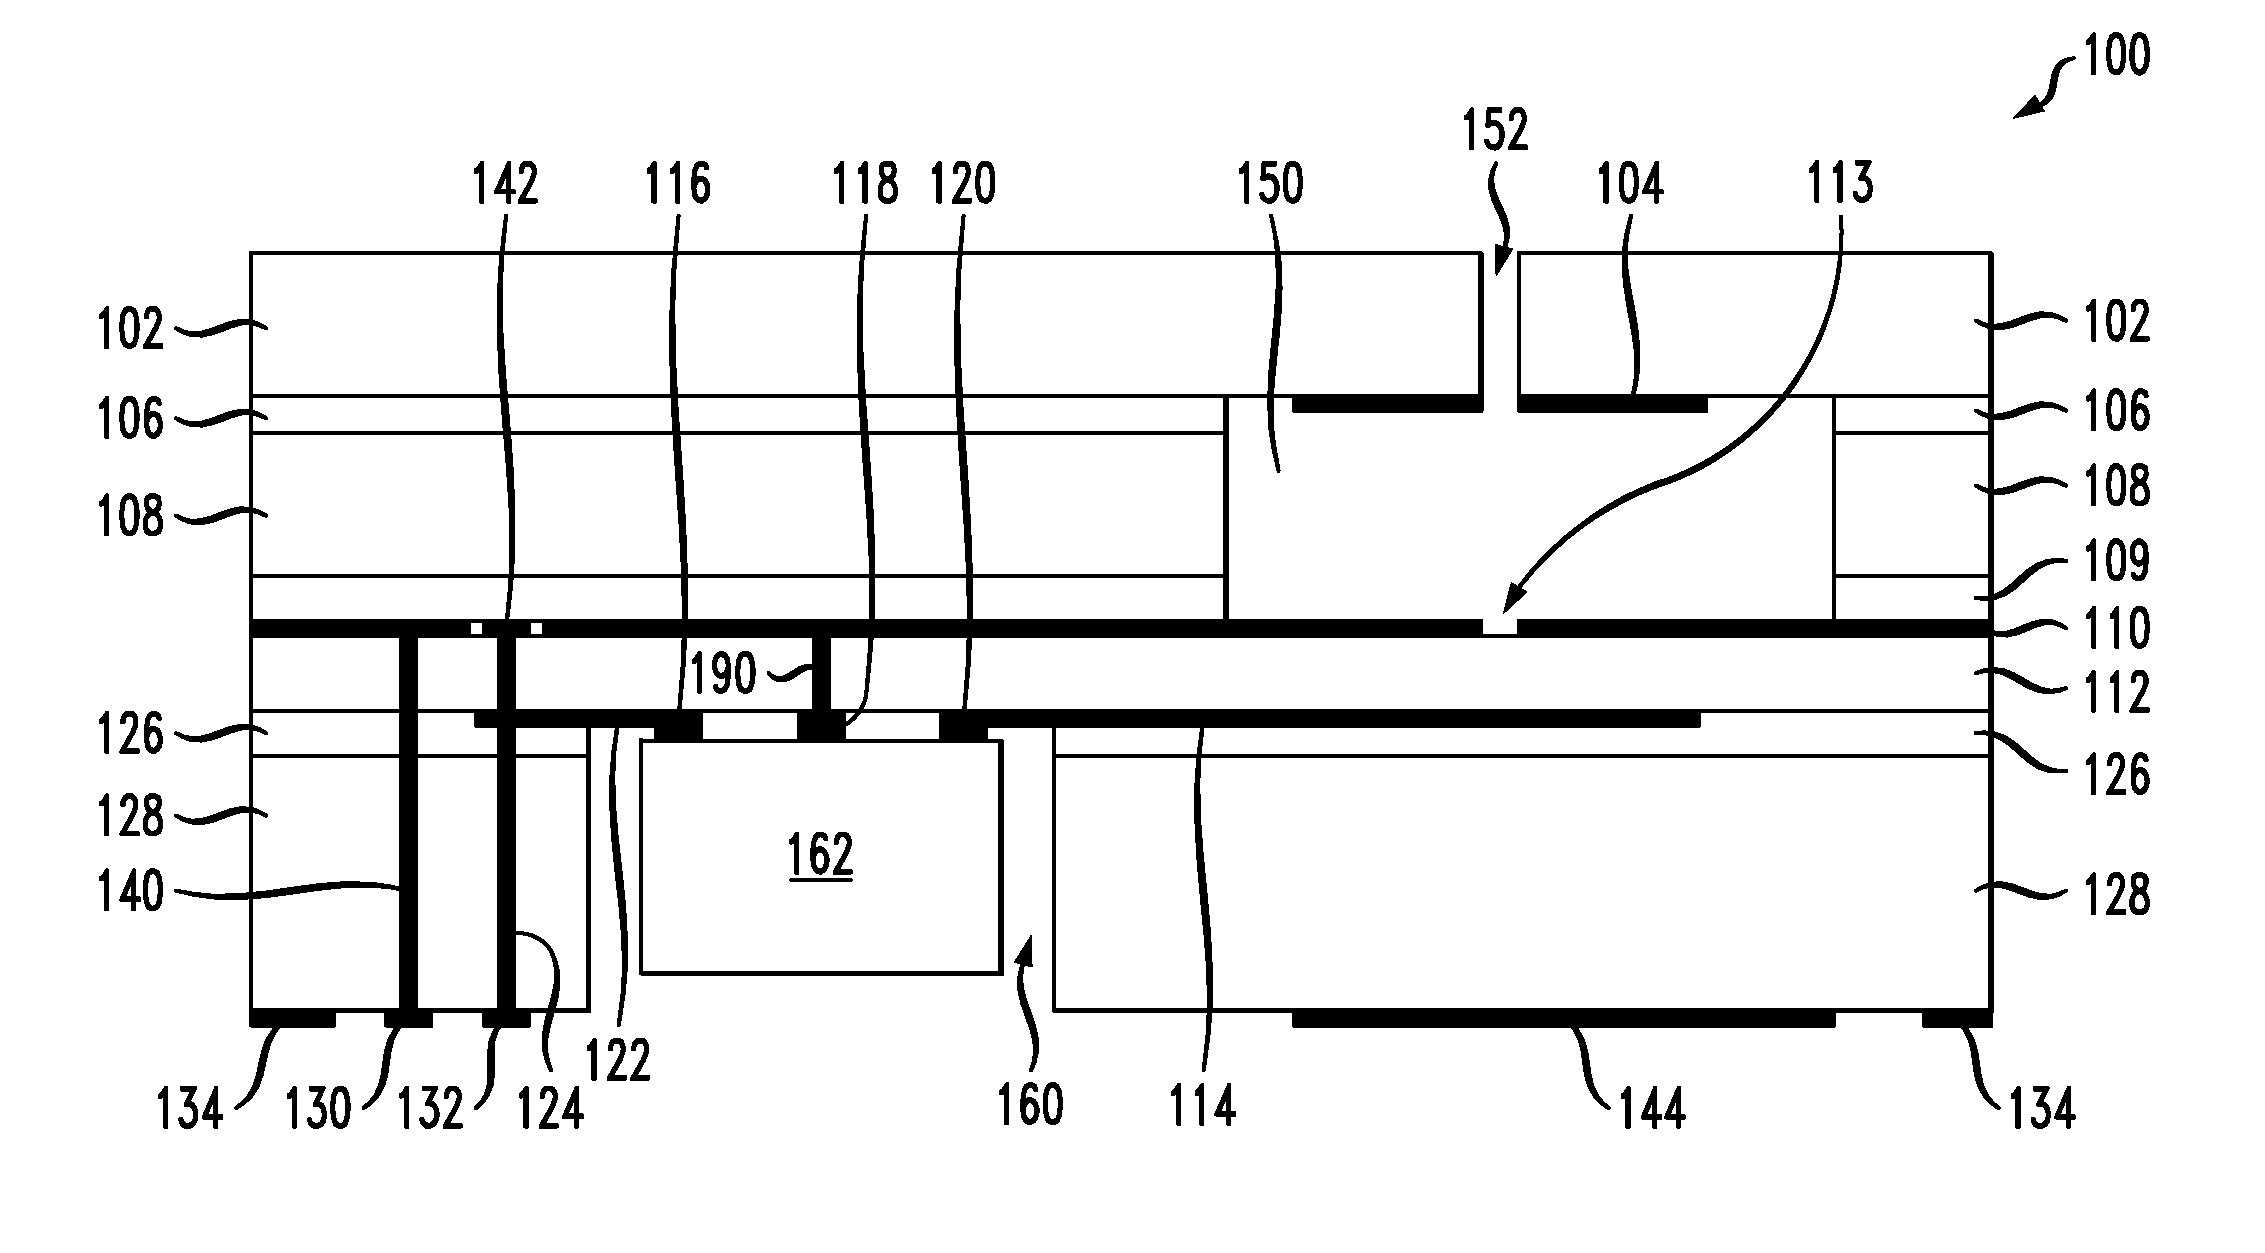 Simple radio frequency integrated circuit (RFIC) packages with integrated antennas